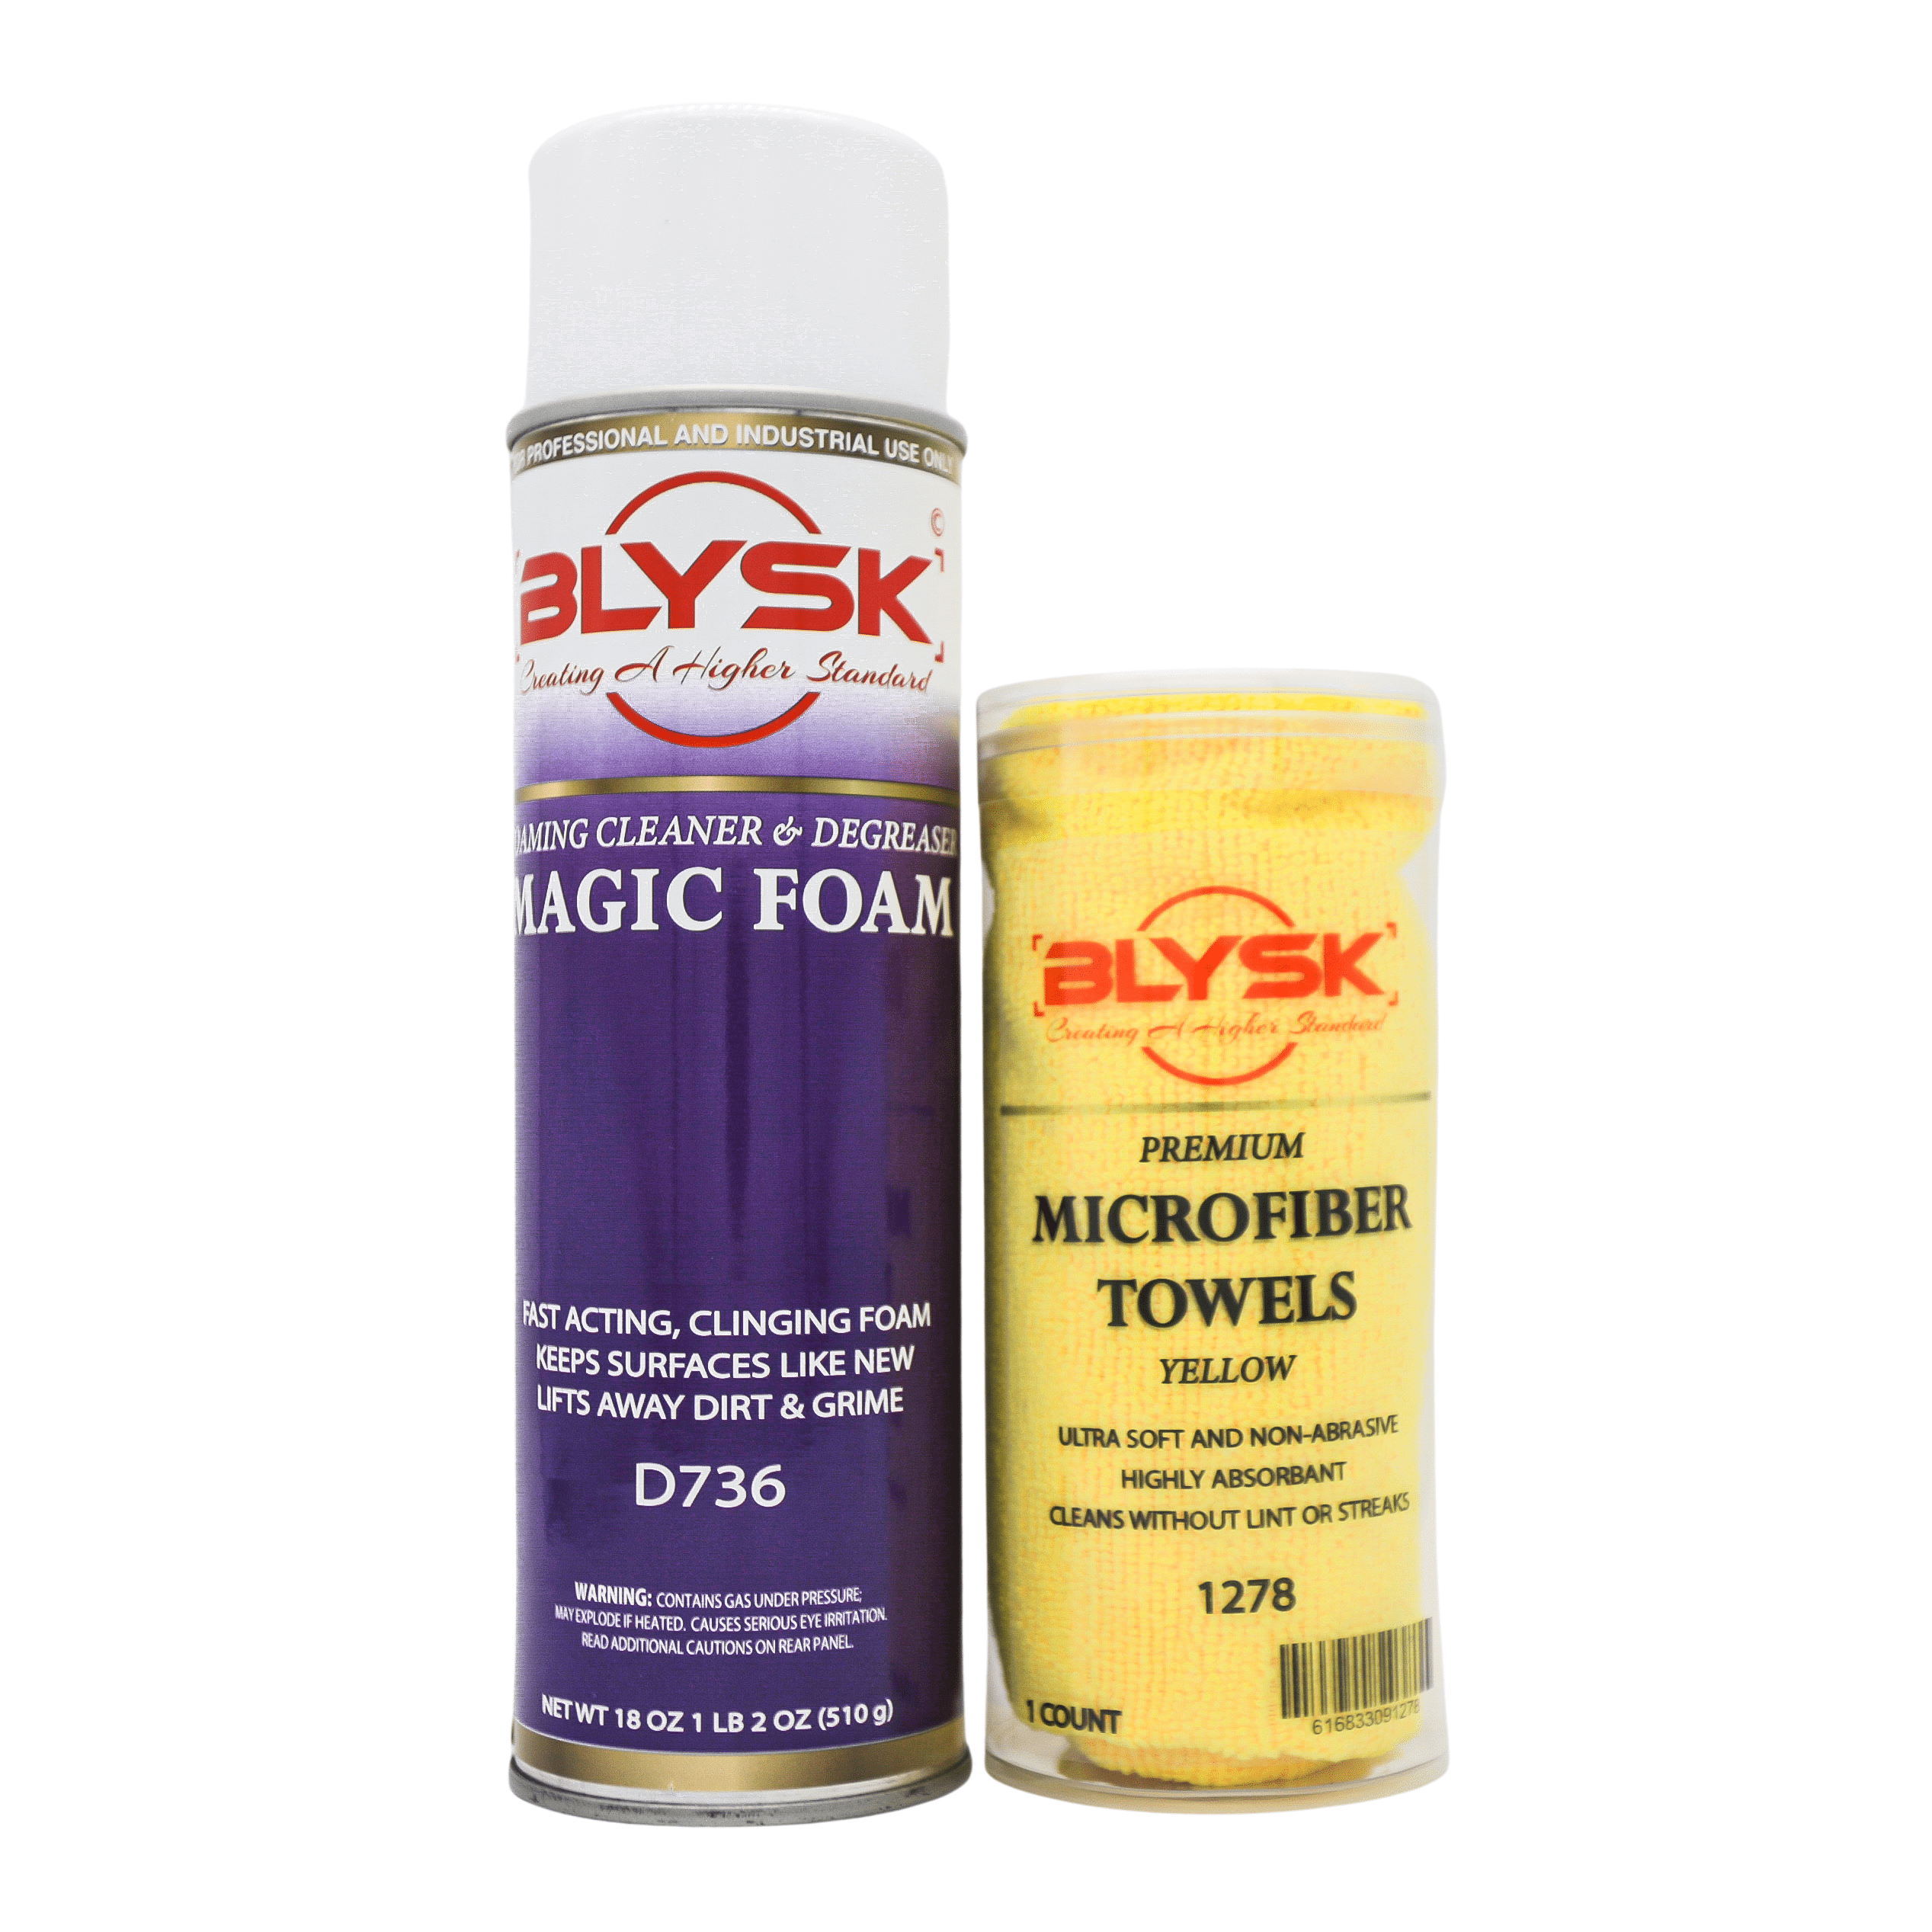 Blysk Magic Foam Cleaner & Degreaser 18oz Fast Acting Foam That Cleans on Contact to Remove Fingerprints, Dirt, Grease from All Washable Surfaces, MU